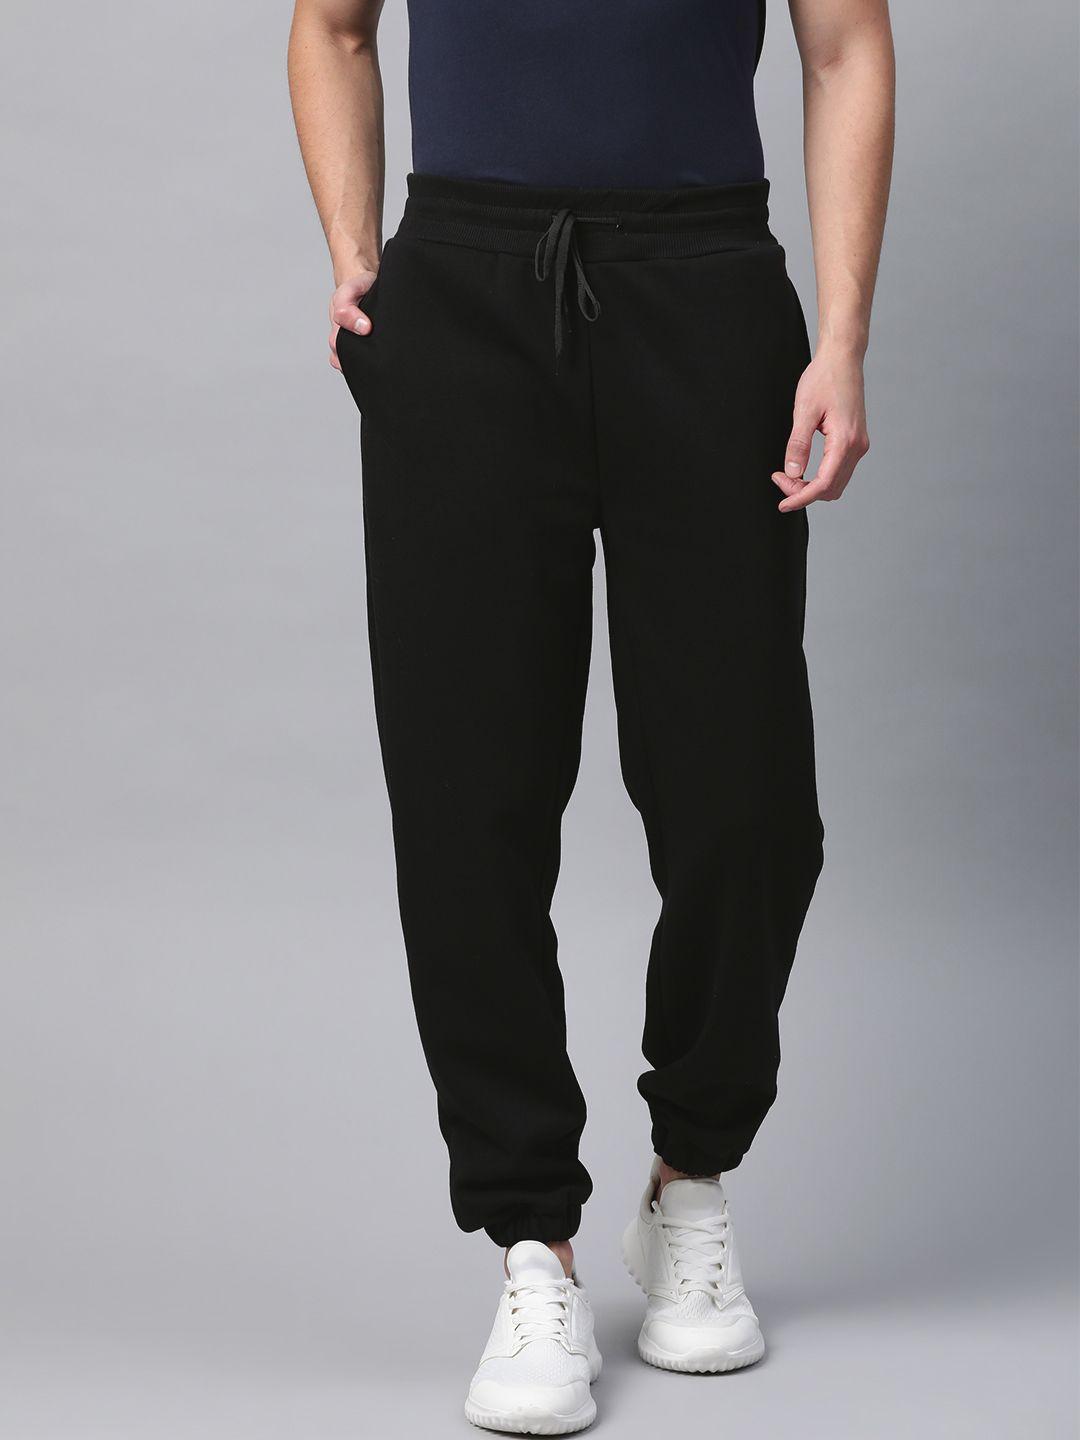 fitkin men black solid winter joggers